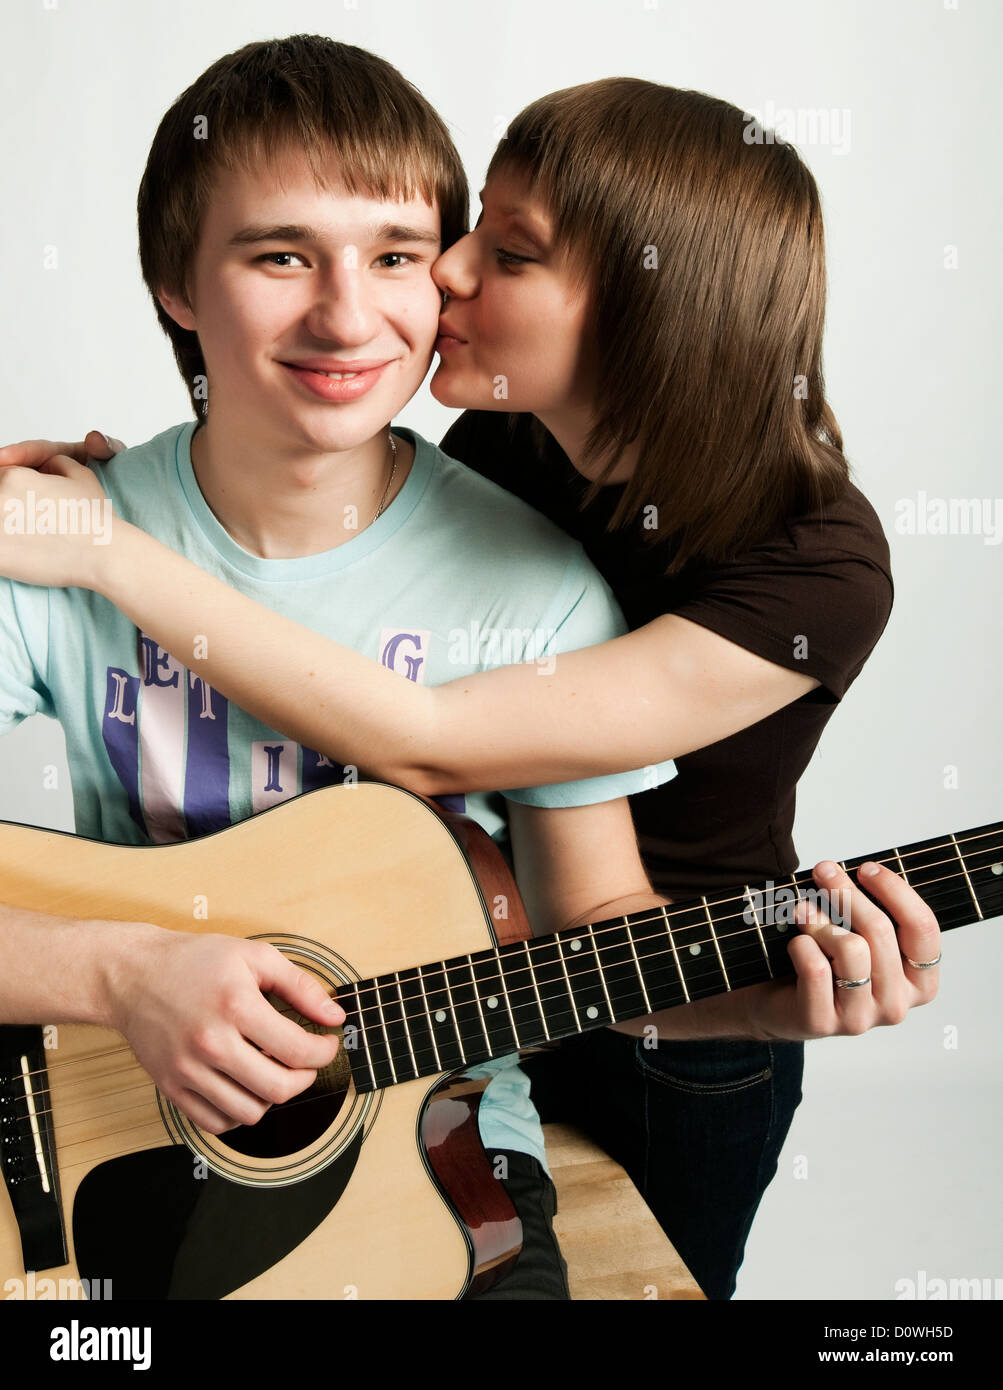 [Adults Only] [young adult] [Russian Ethnicity] Stock Photo